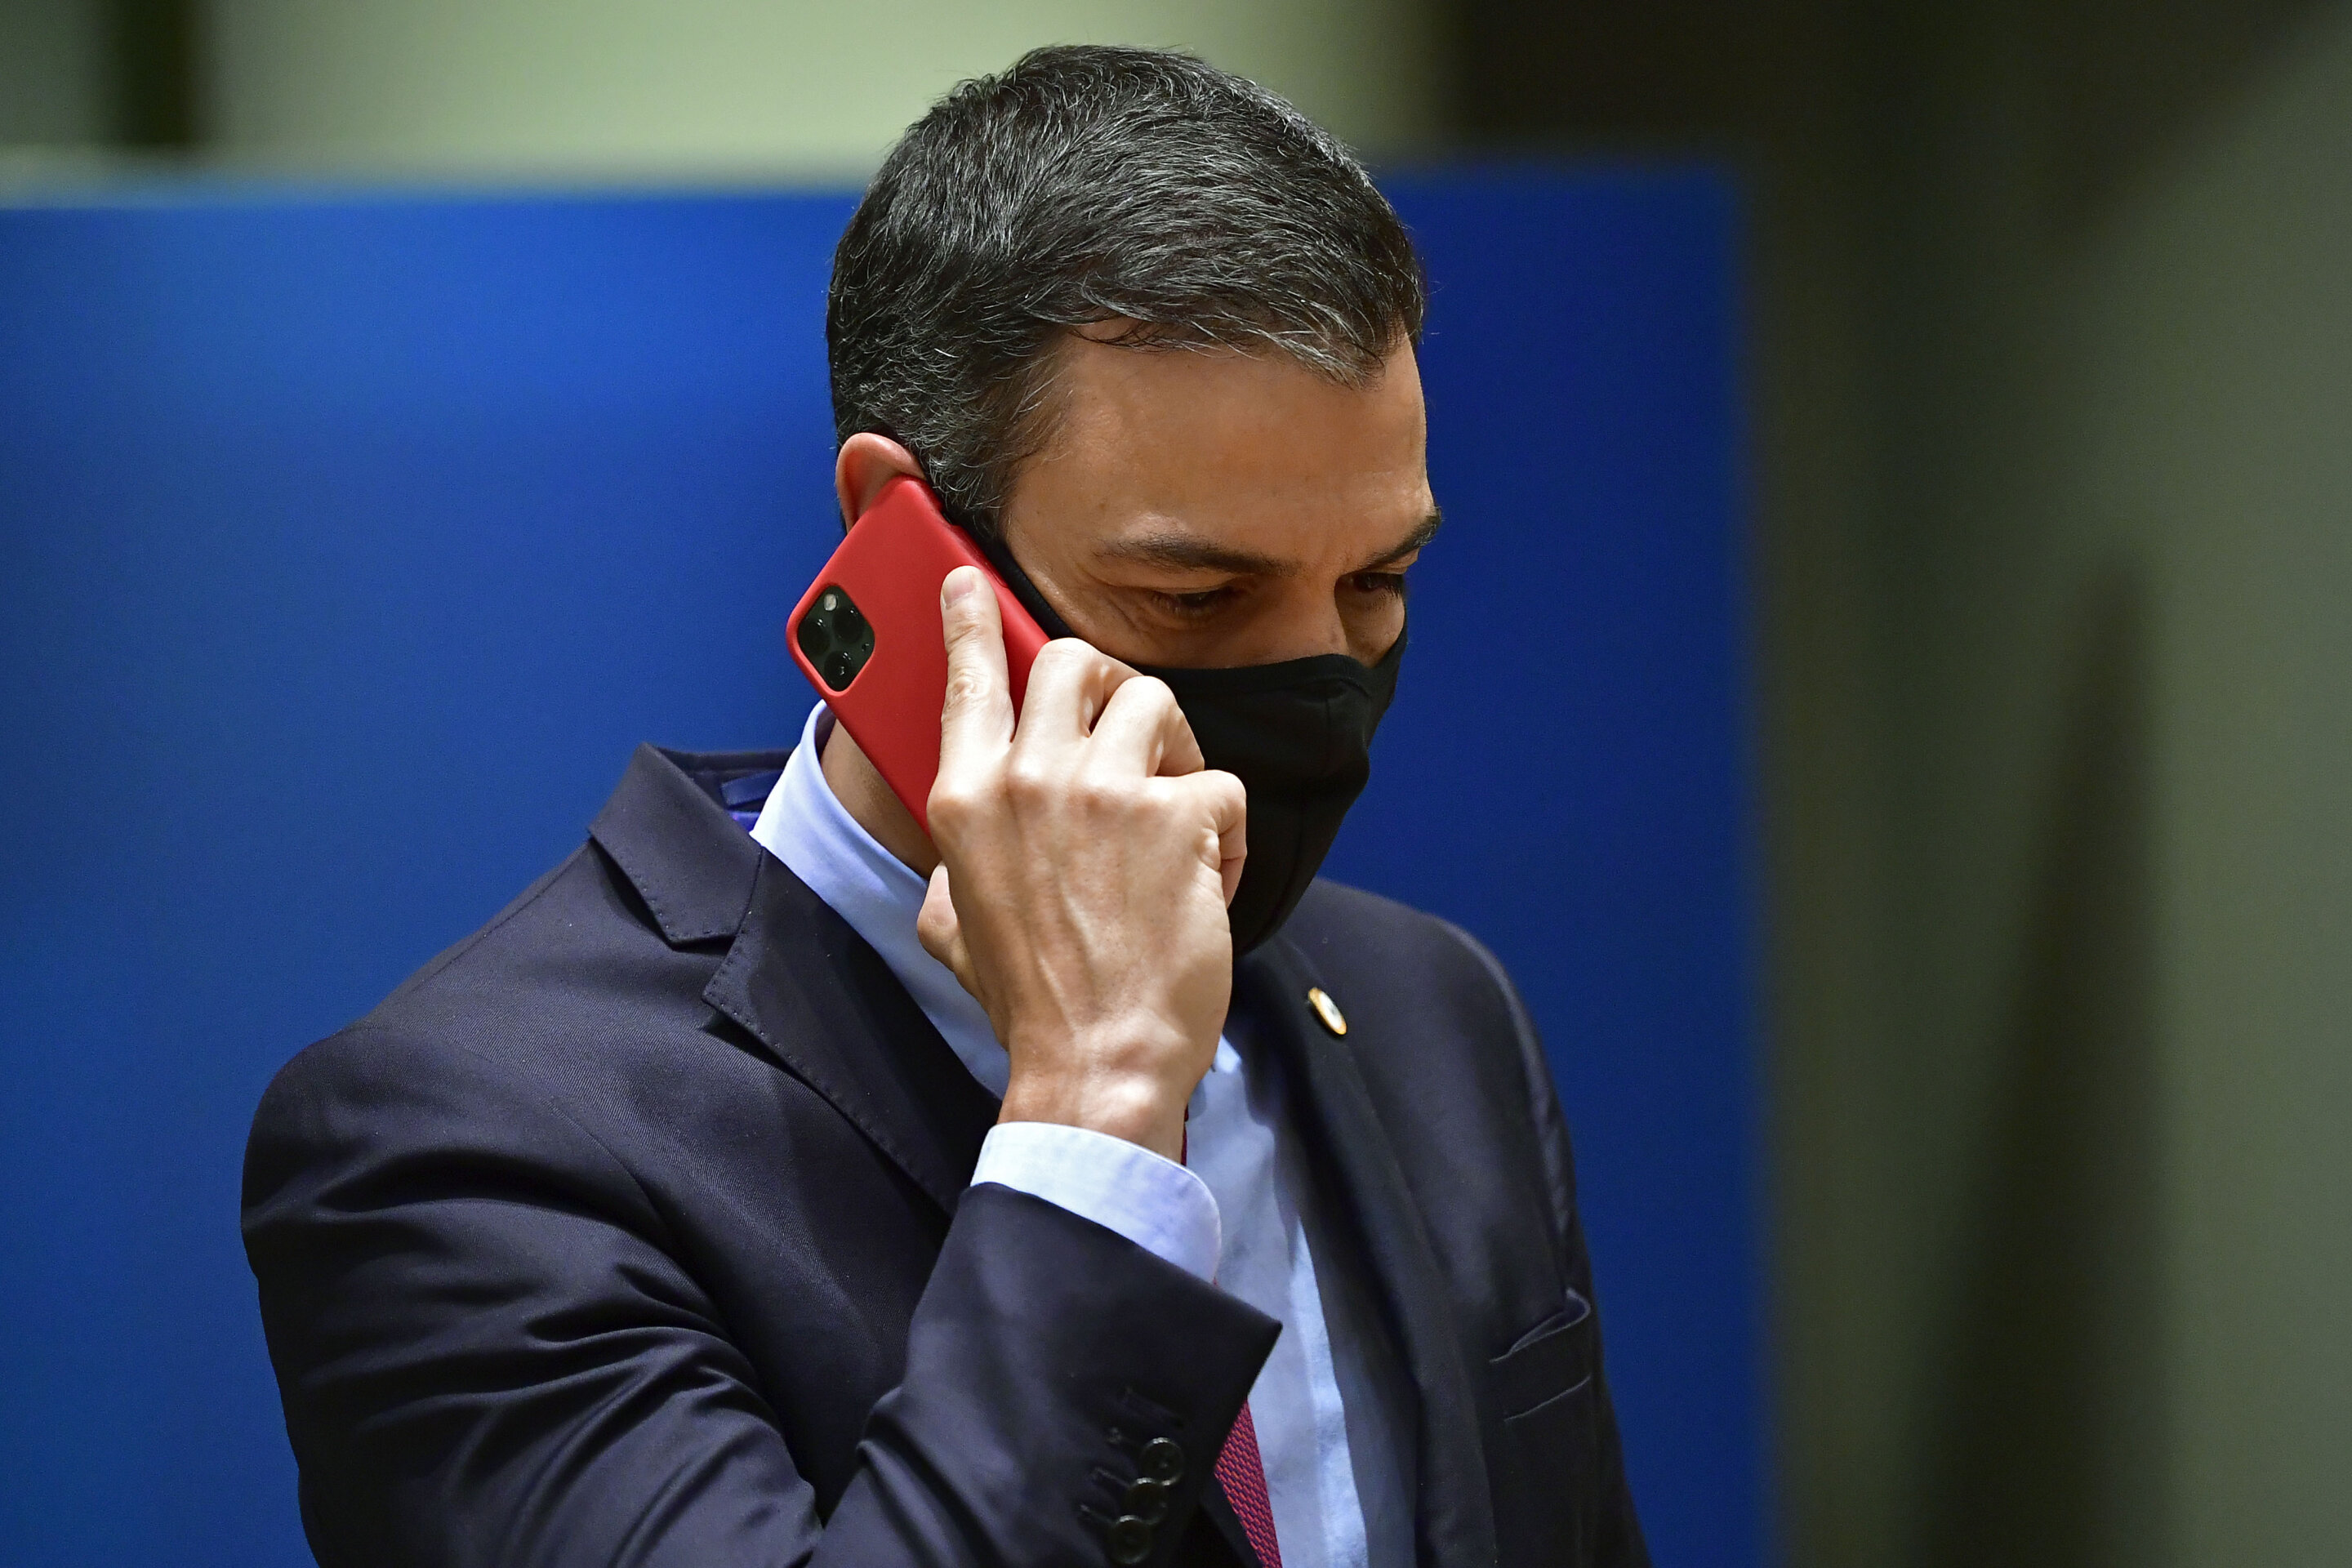 Spain: 2021 spyware attack targeted prime minister’s phone